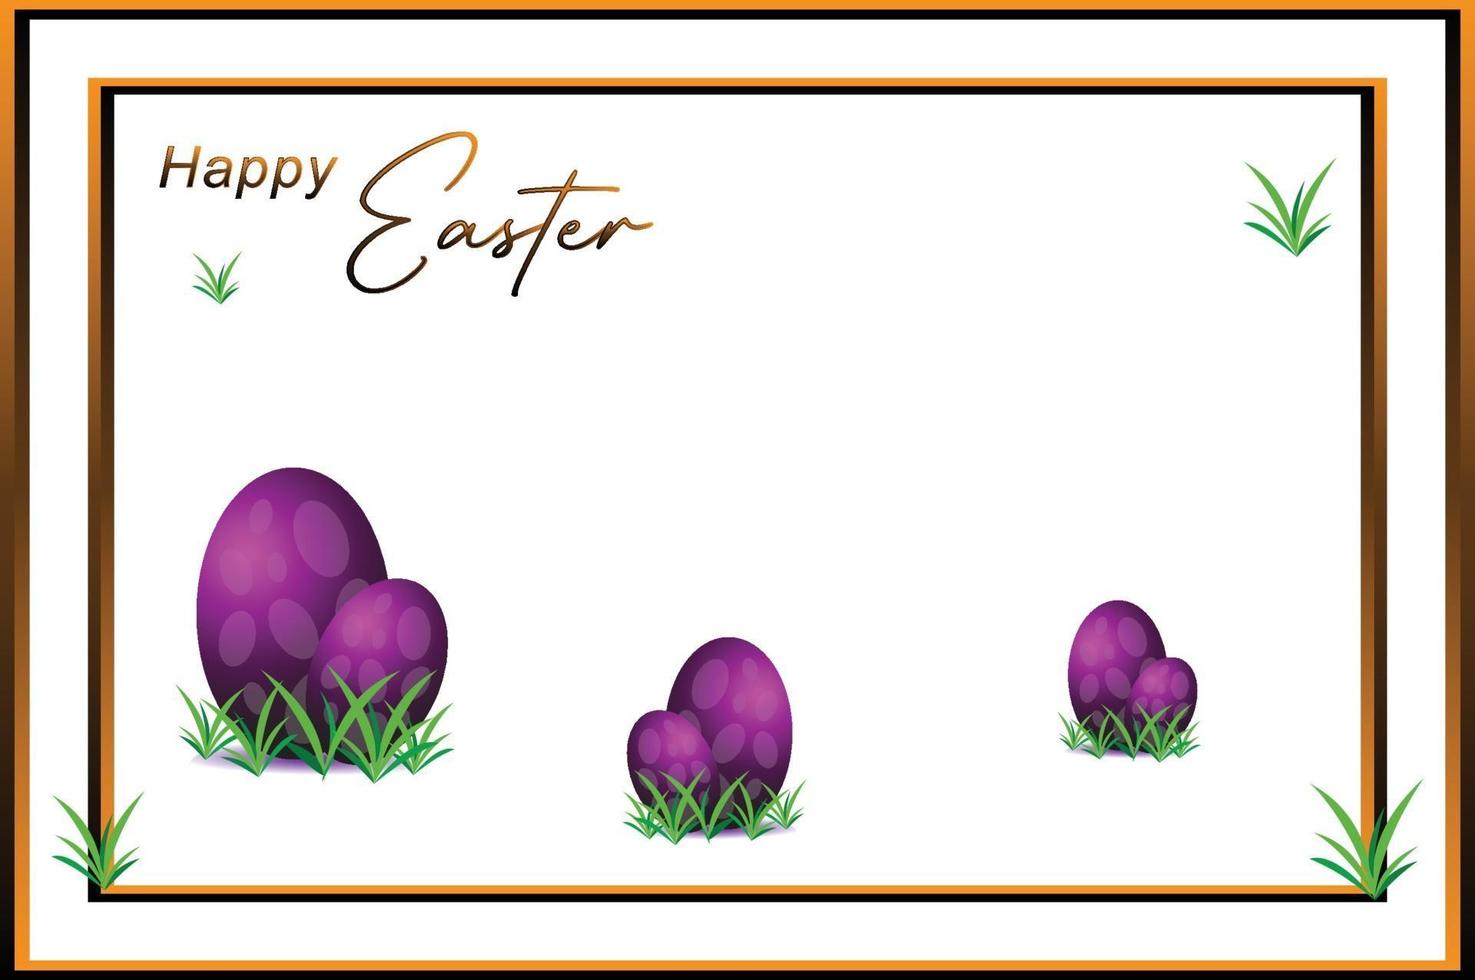 Happy easter frame art with golden lines vector